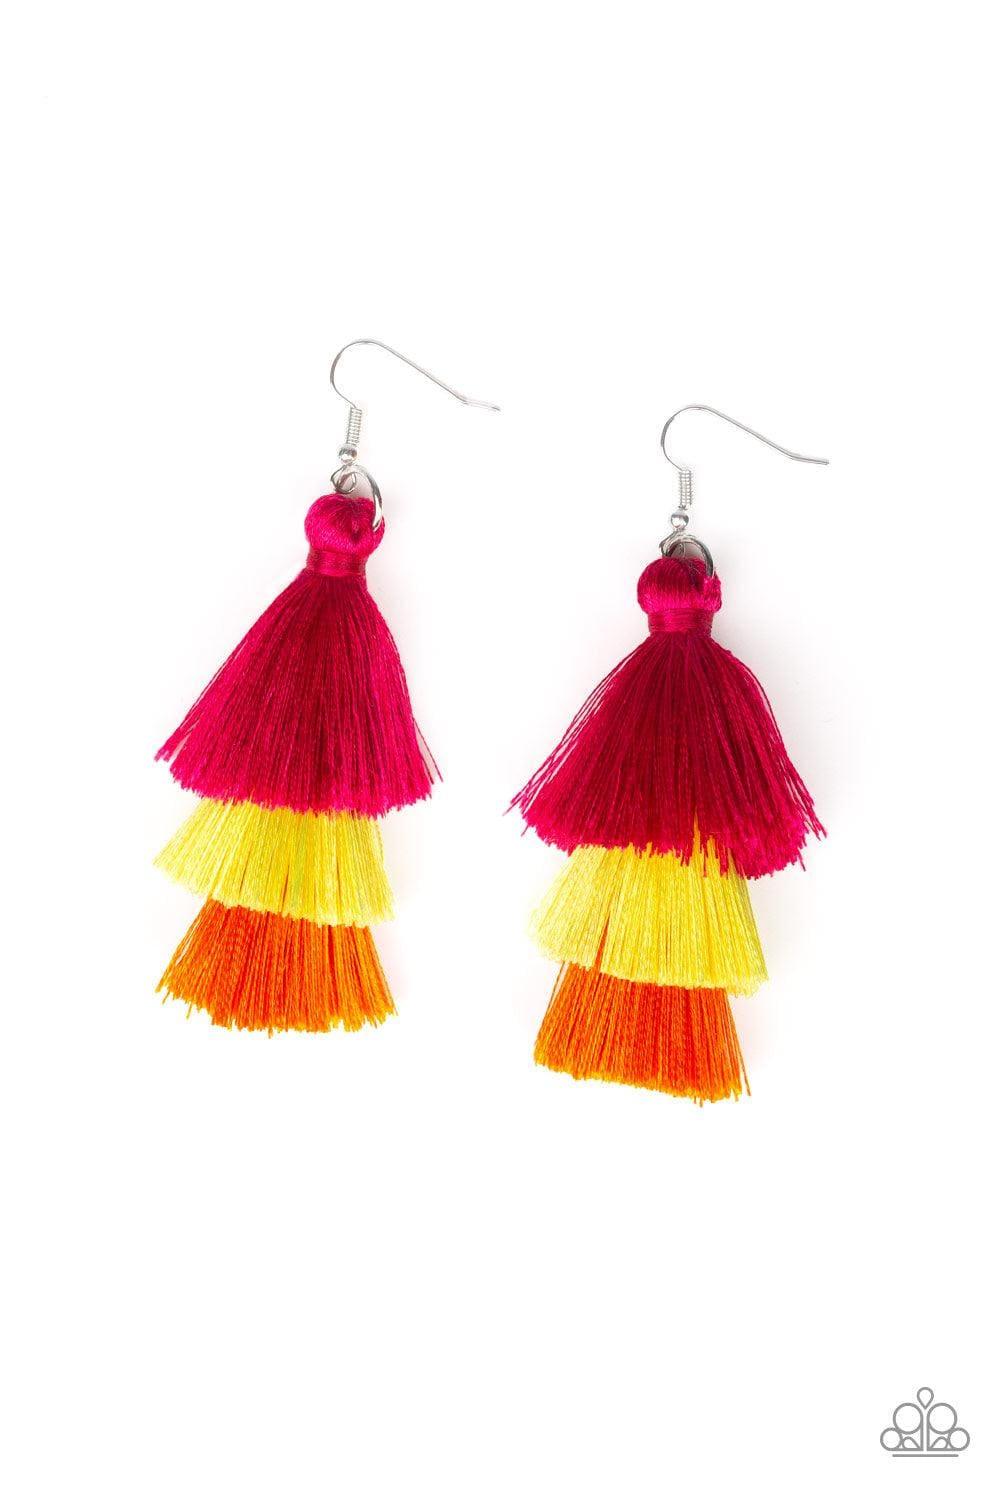 Paparazzi Accessories - Hold On To Your Tassel! - Multicolor Earrings - Bling by JessieK